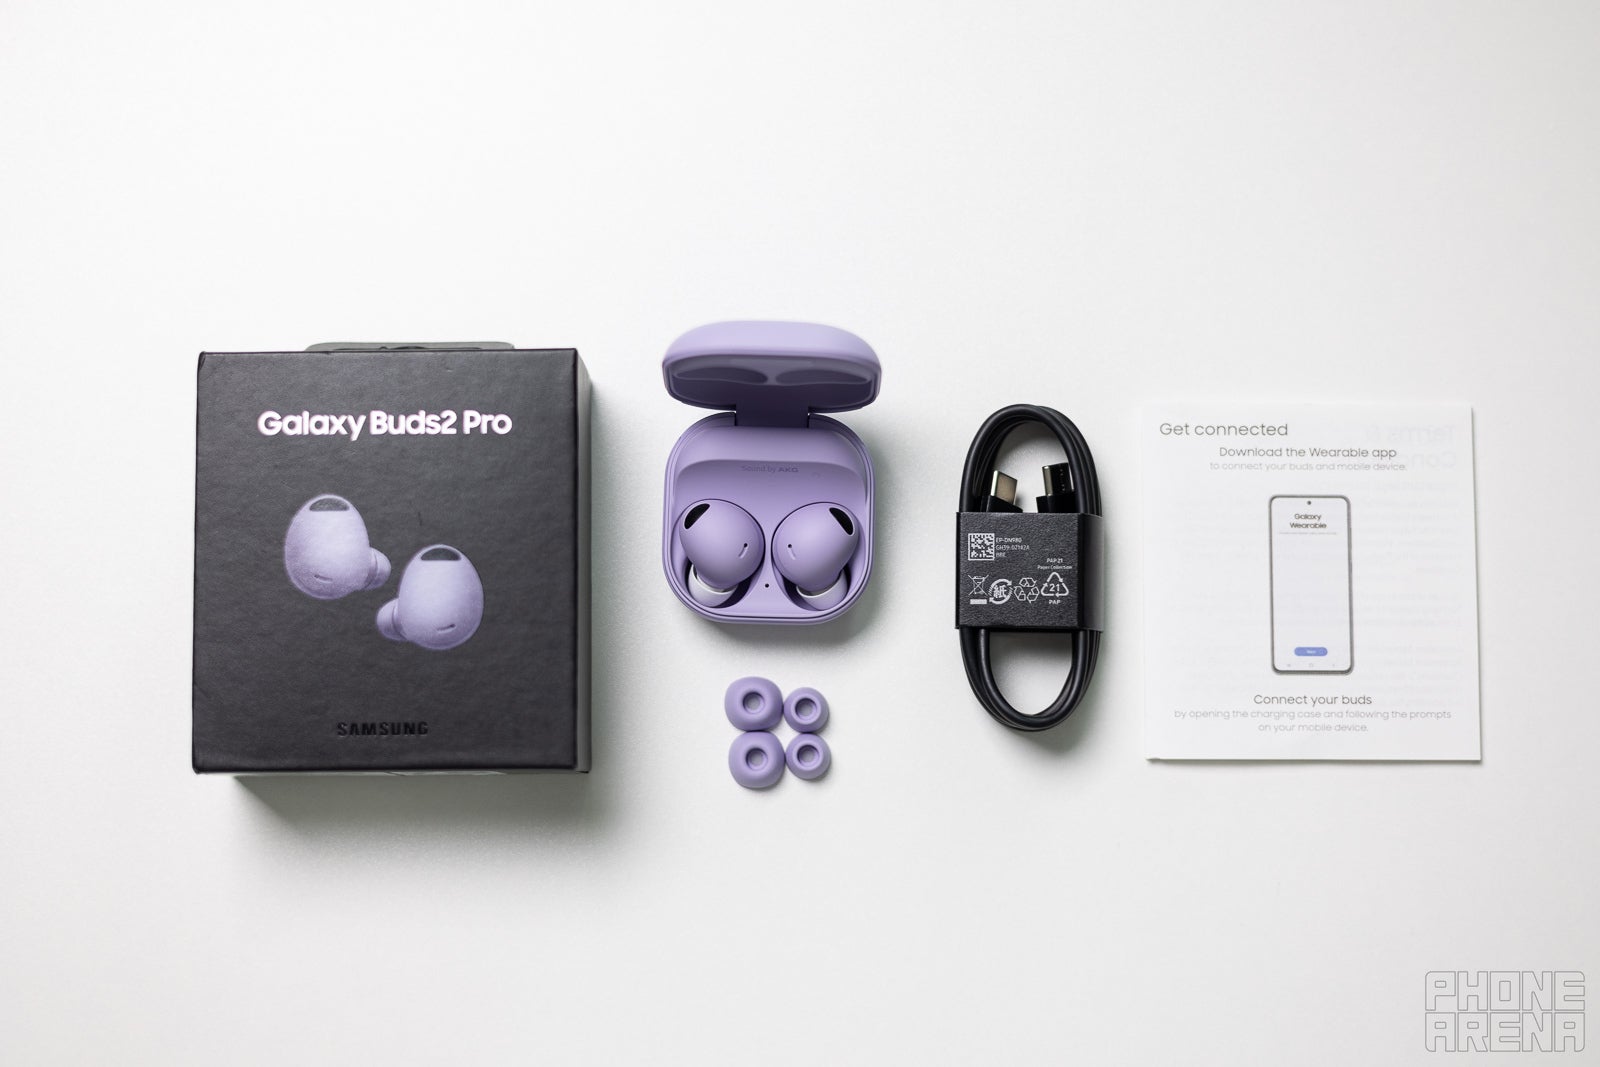 Samsung Galaxy Buds 2 specifications